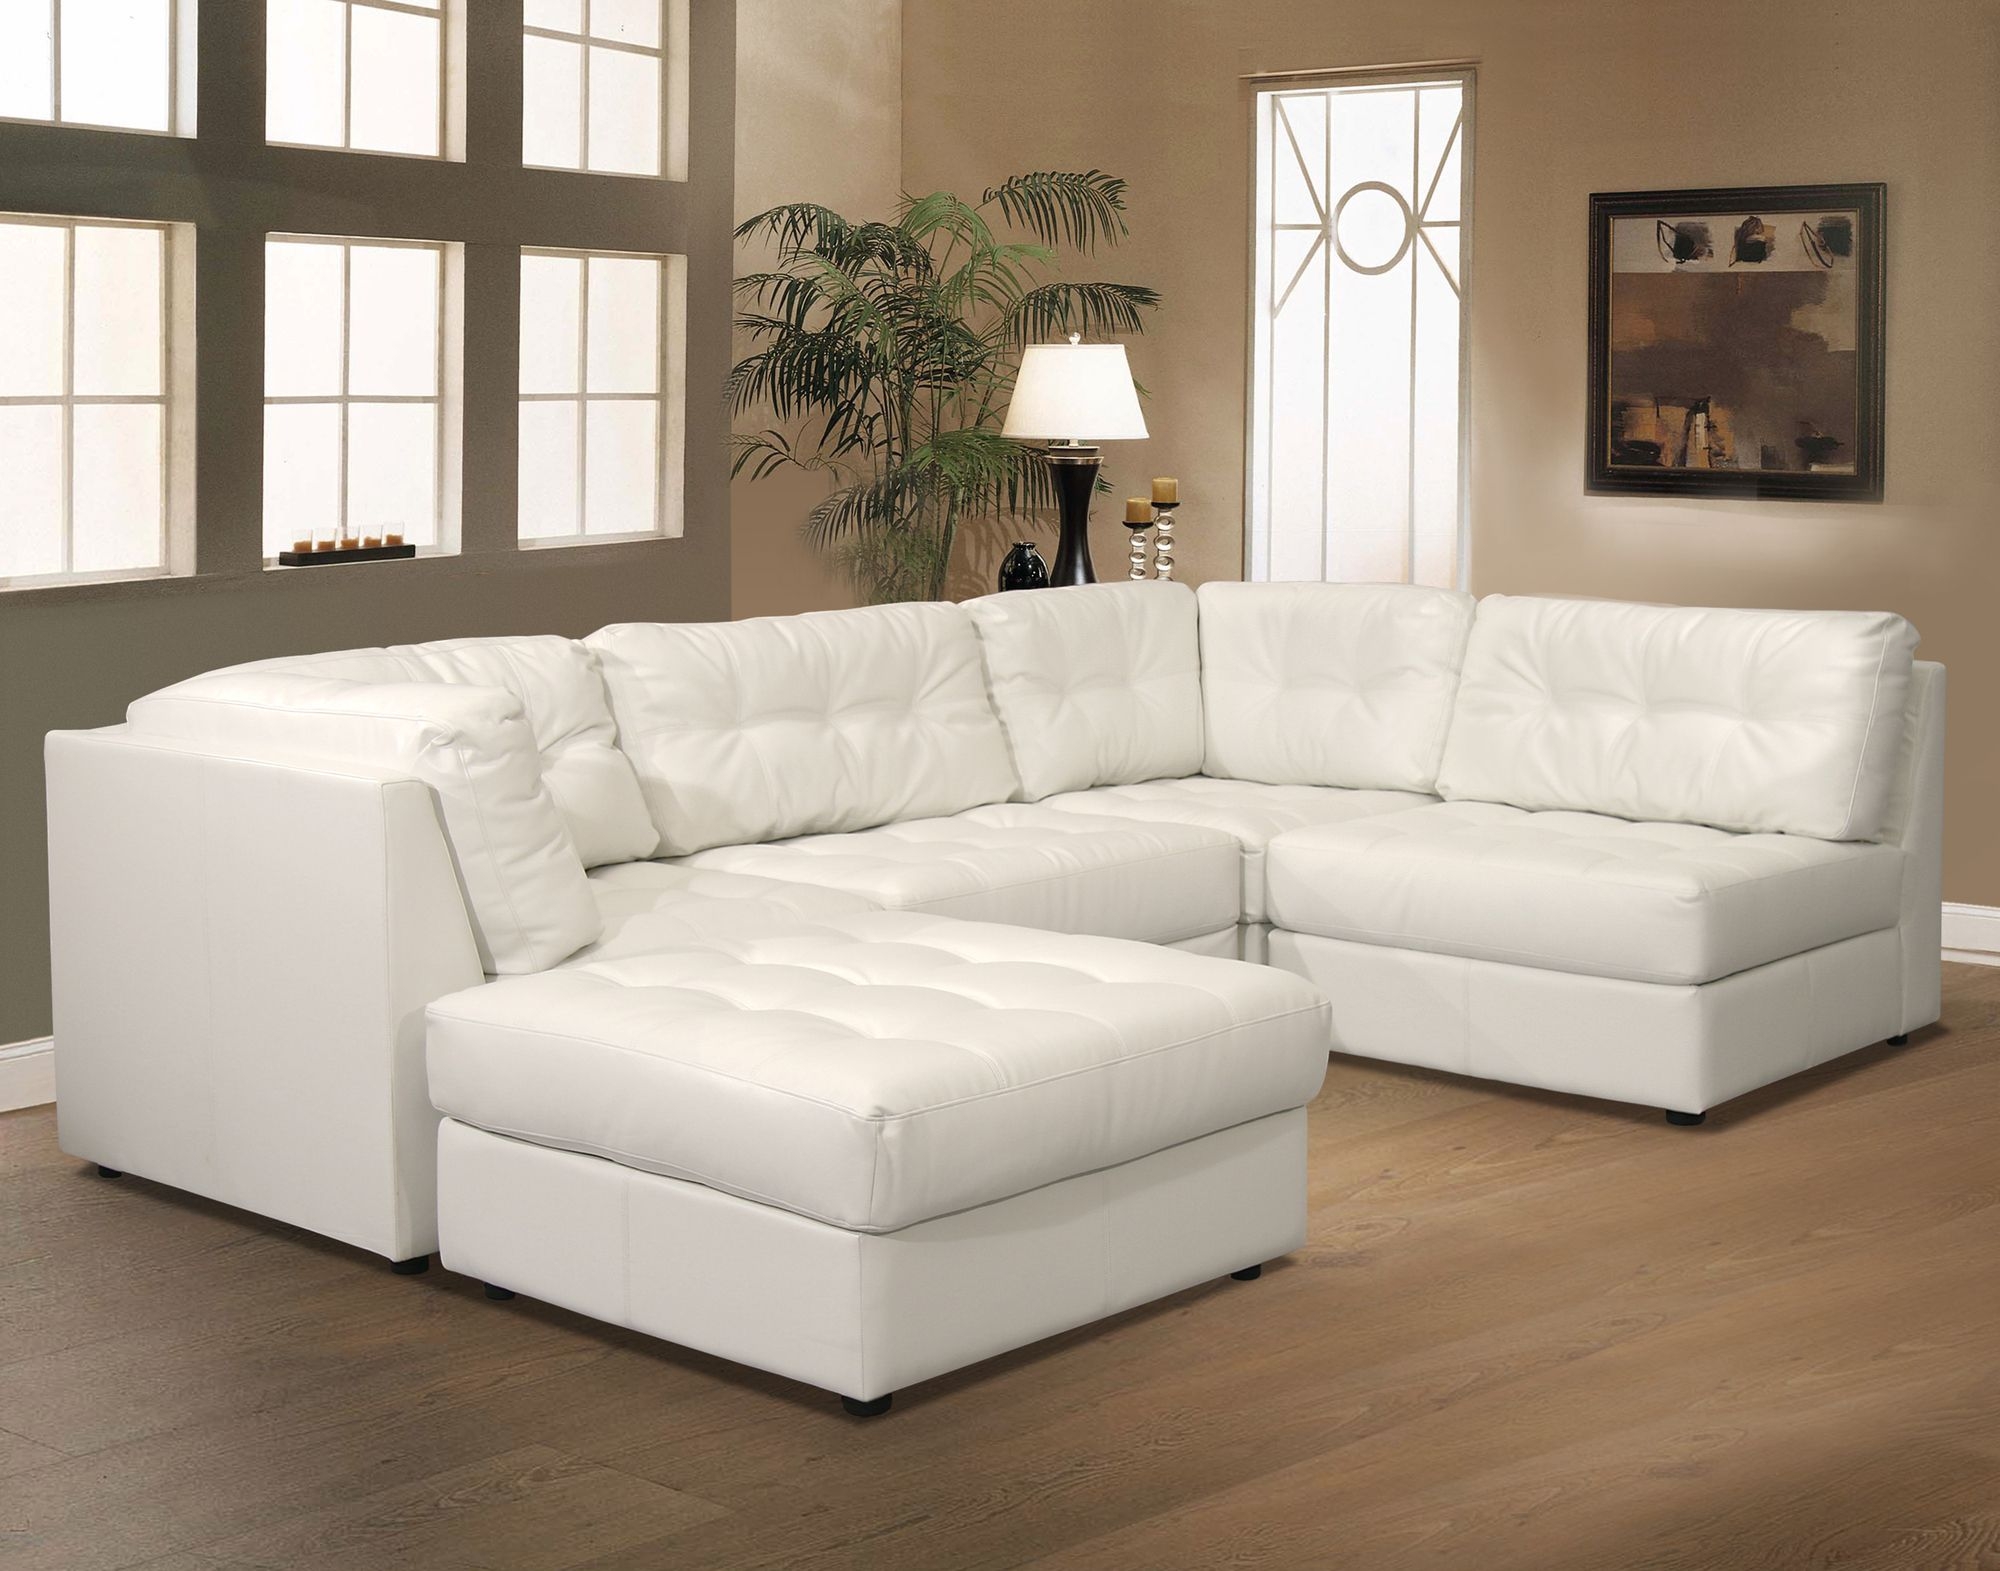 Small white leather sectional 15